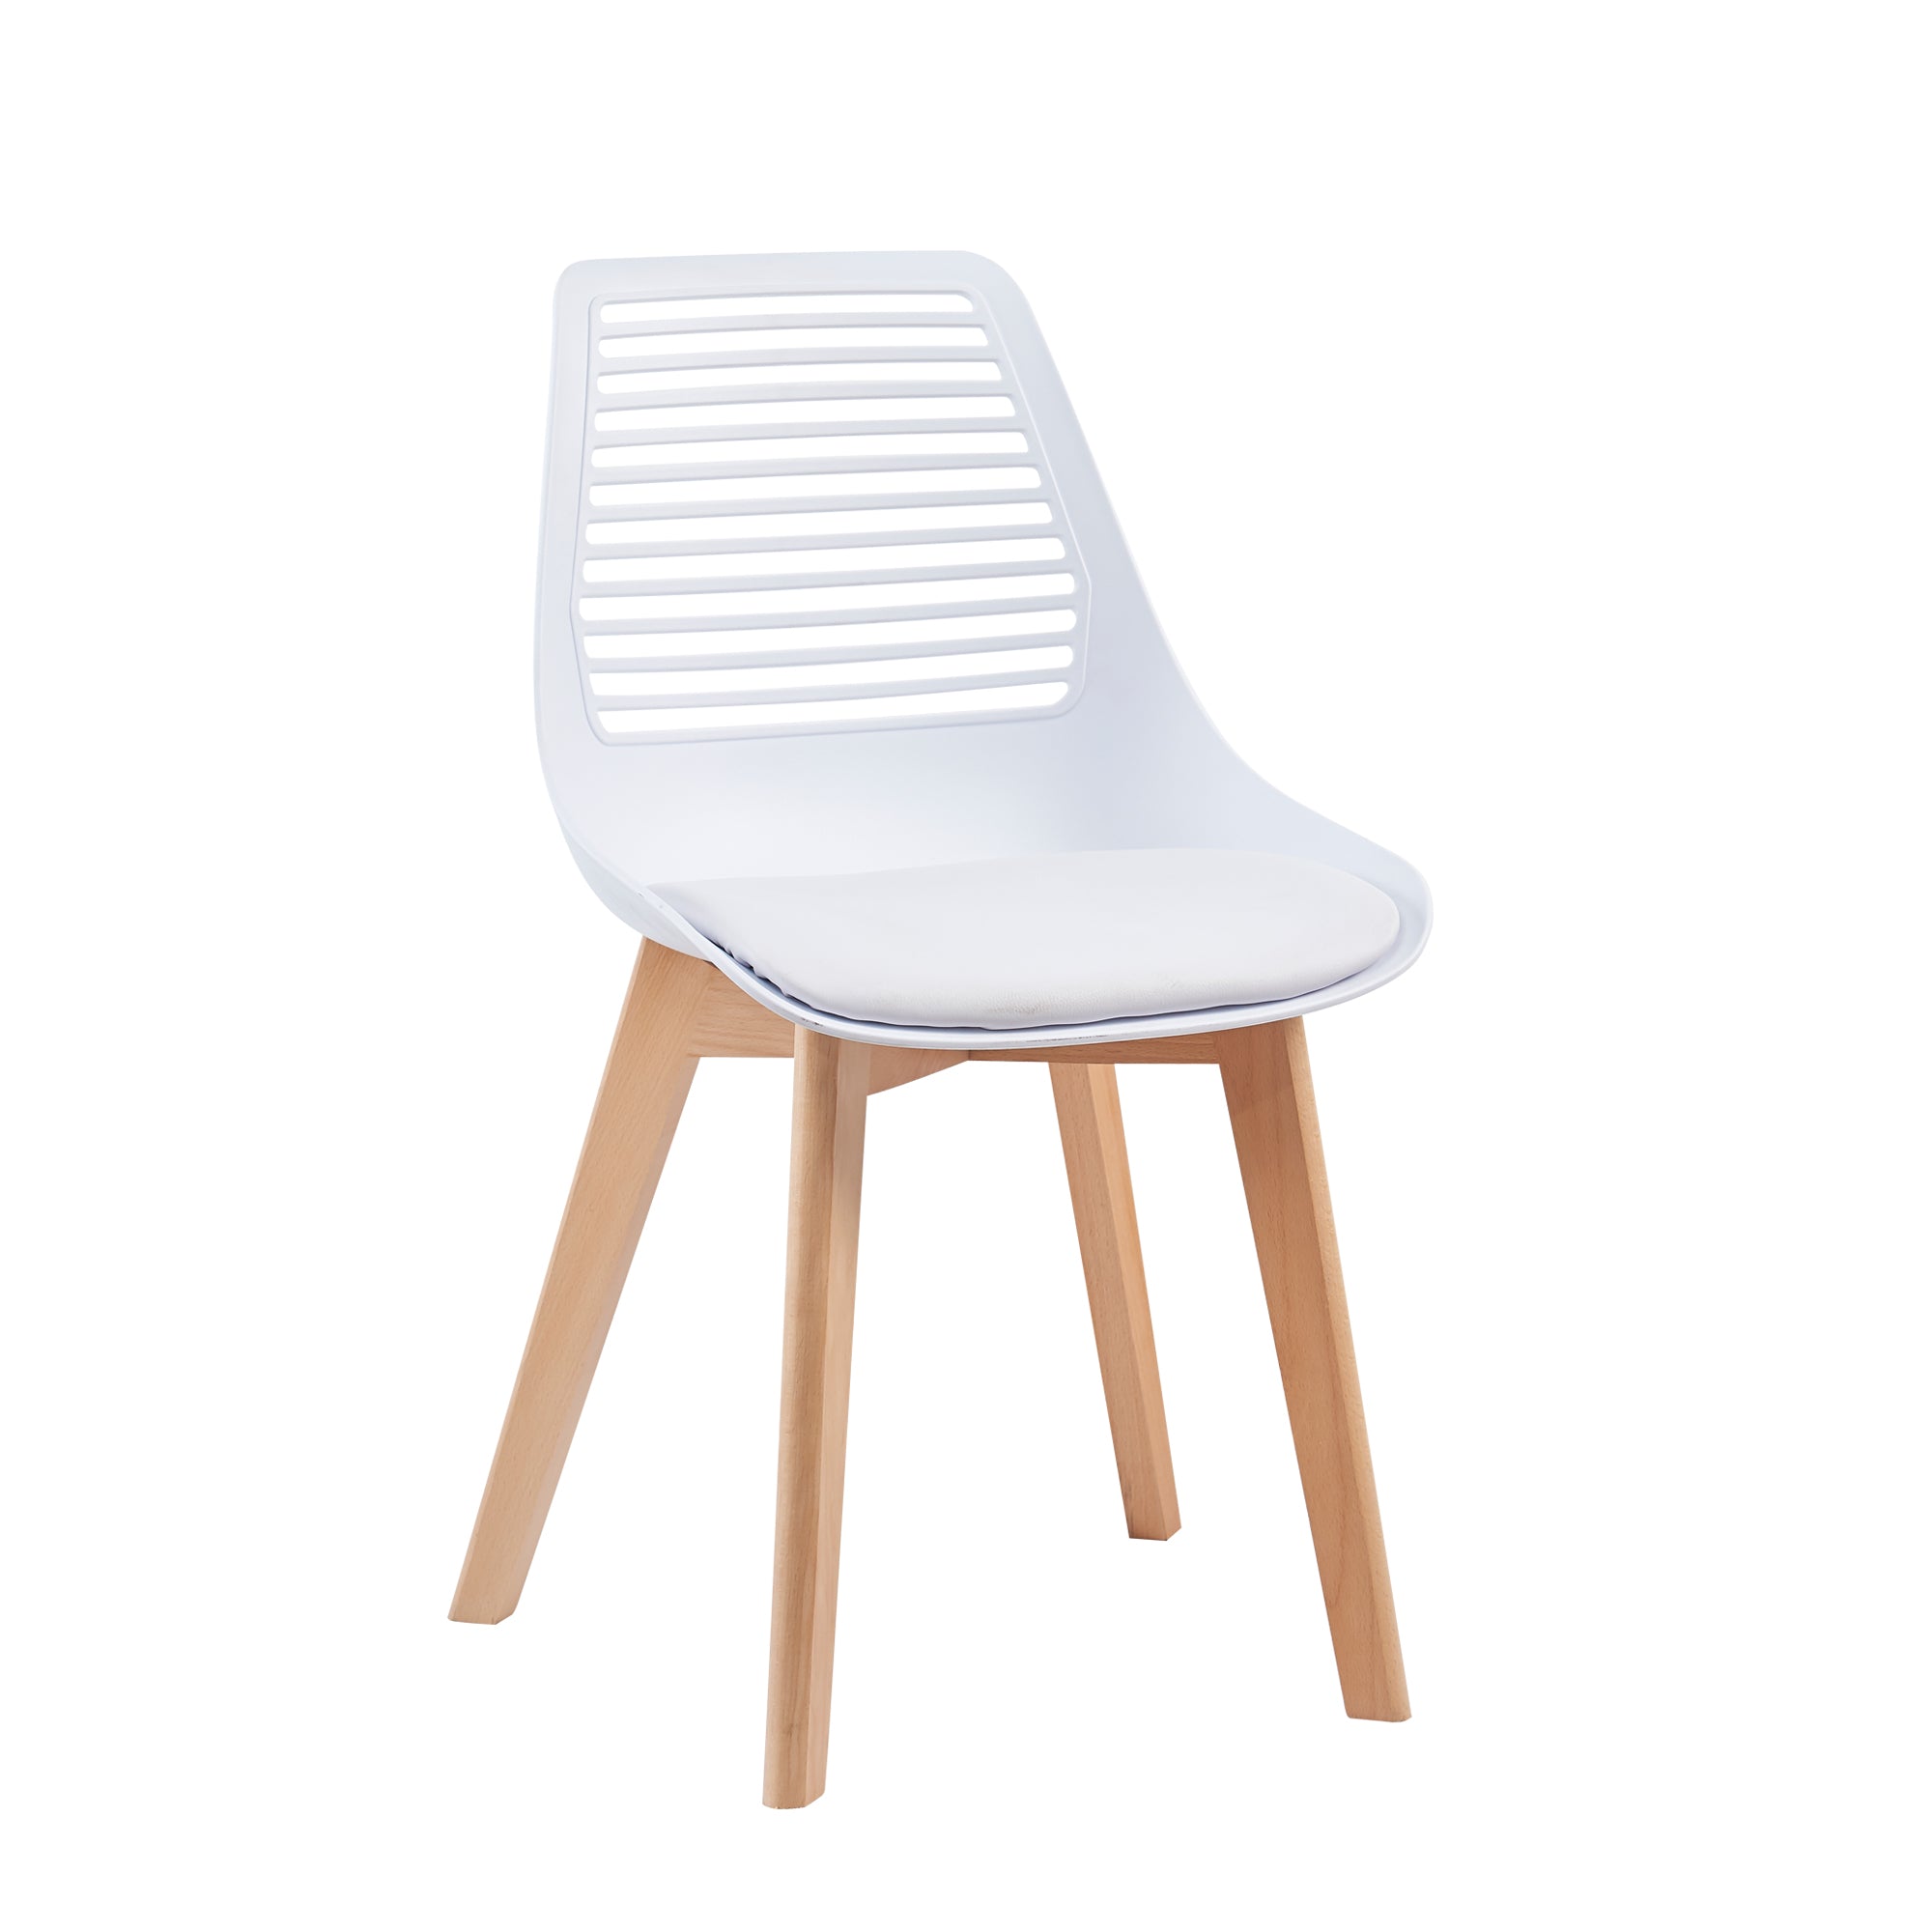 Plastic chair for dining room, dining chair living room chair（set of 2 White color）